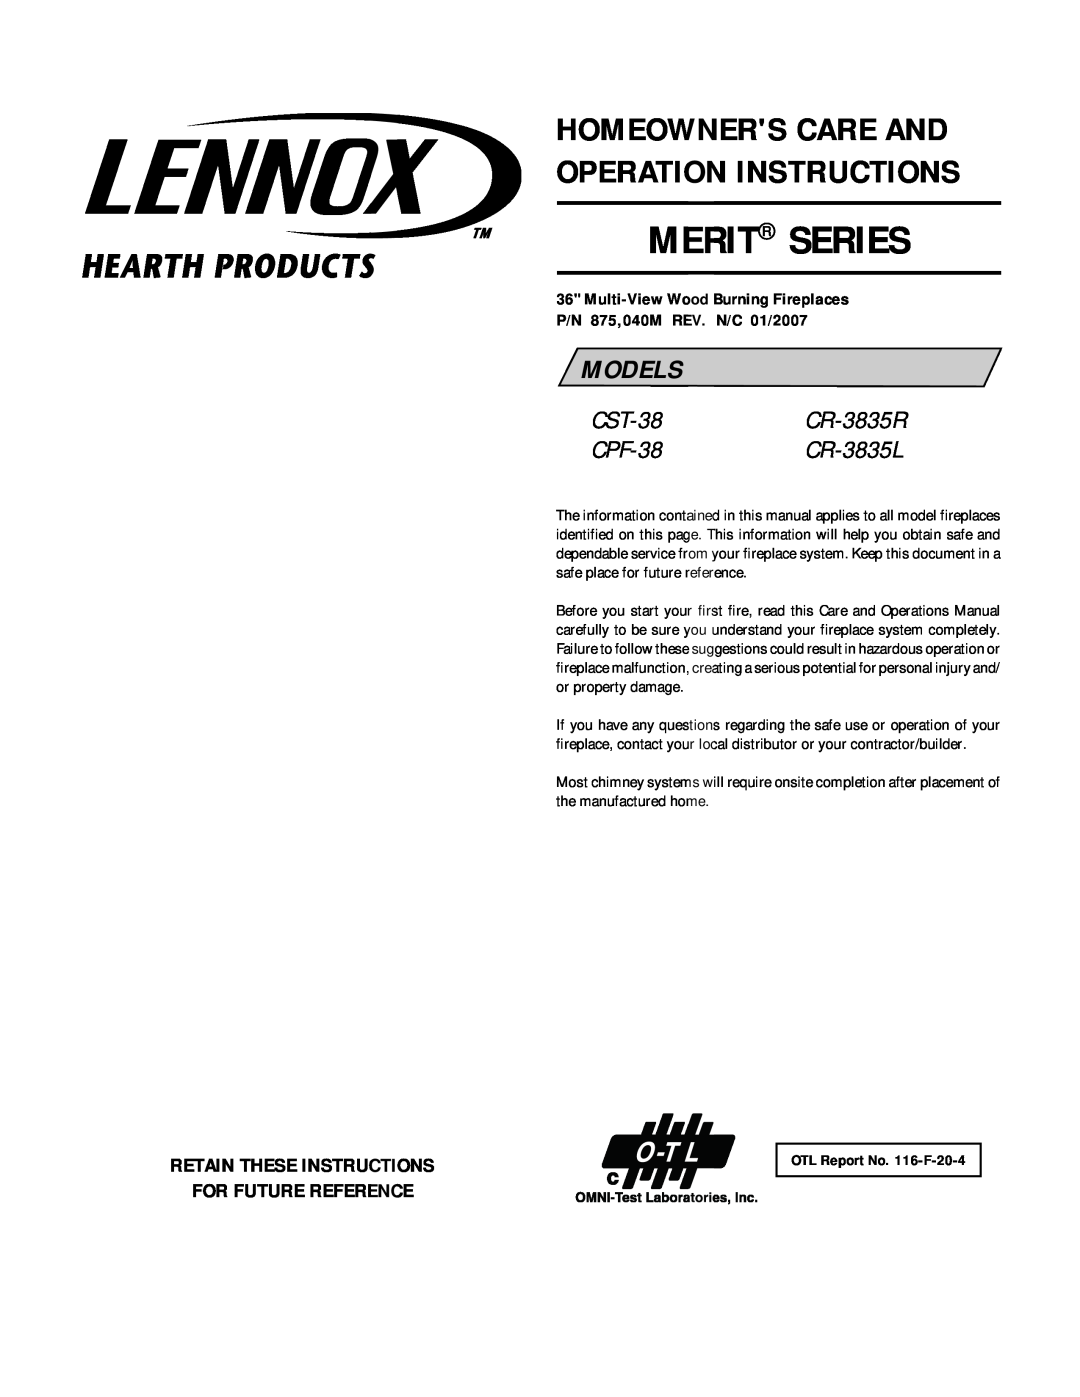 Lennox Hearth CPF-38 manual Retain These Instructions For Future Reference, OTL Report No. 116-F-20-4, Merit Series 